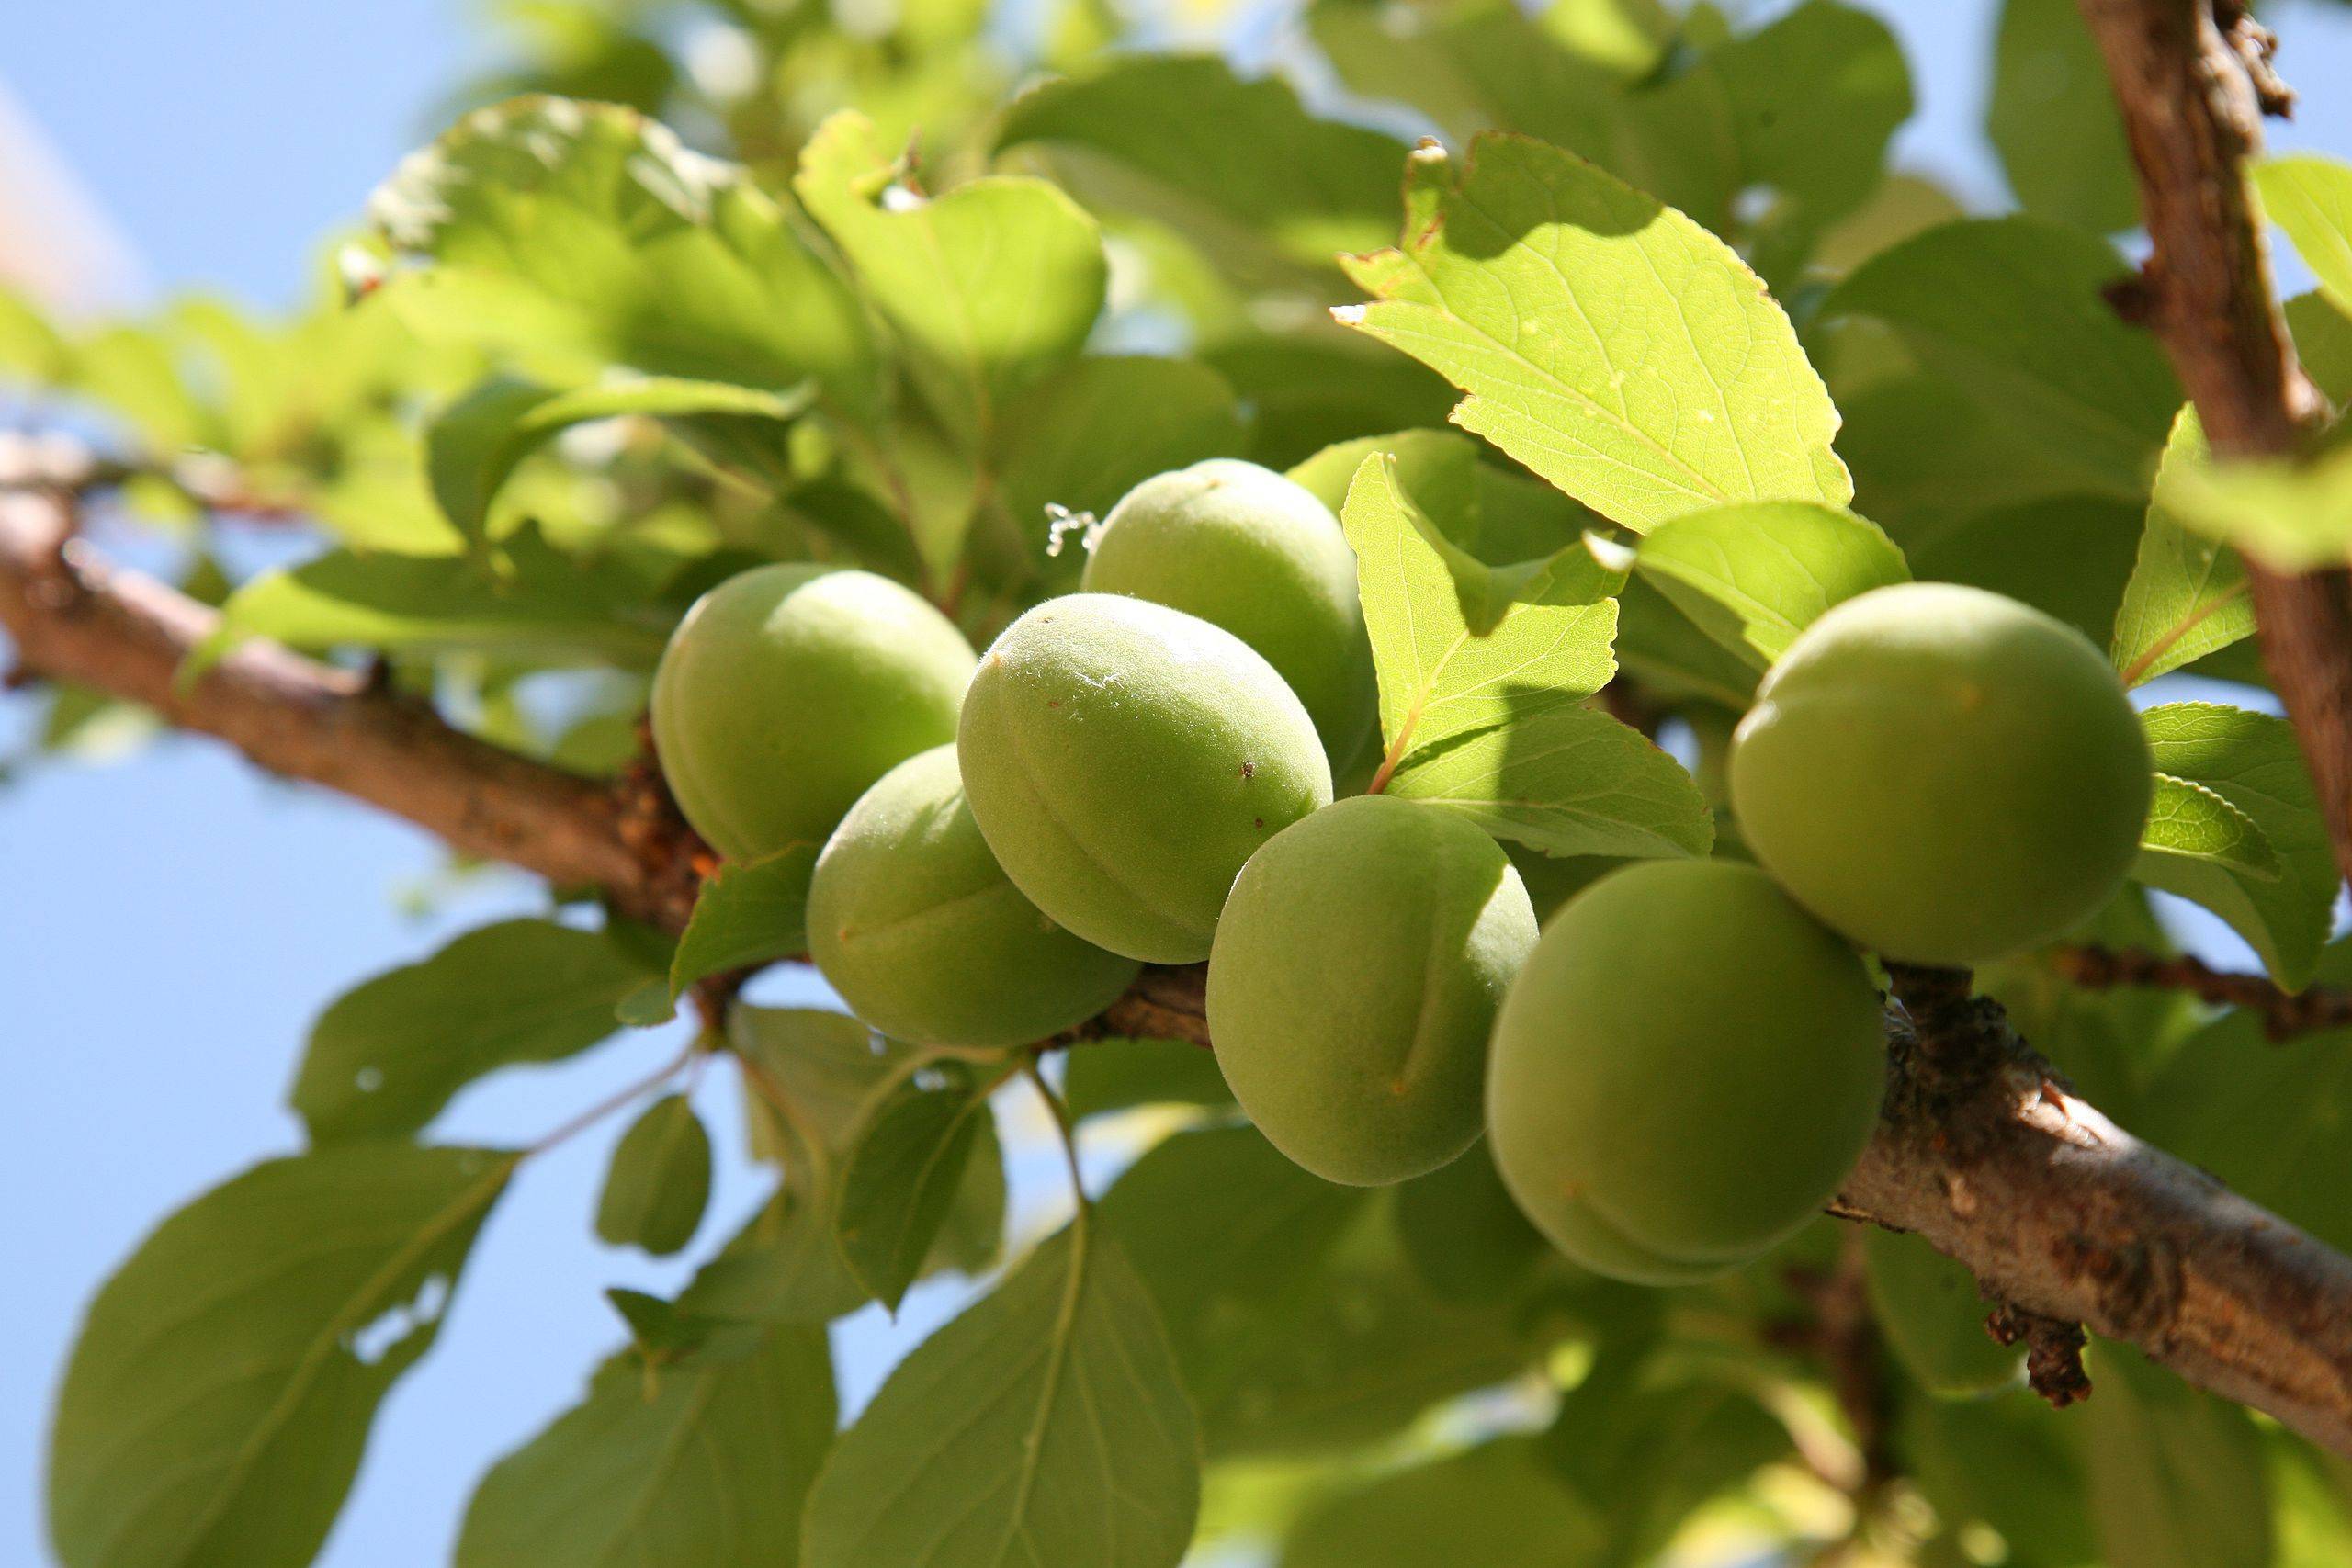 light-green fruits and leaves on brown branches